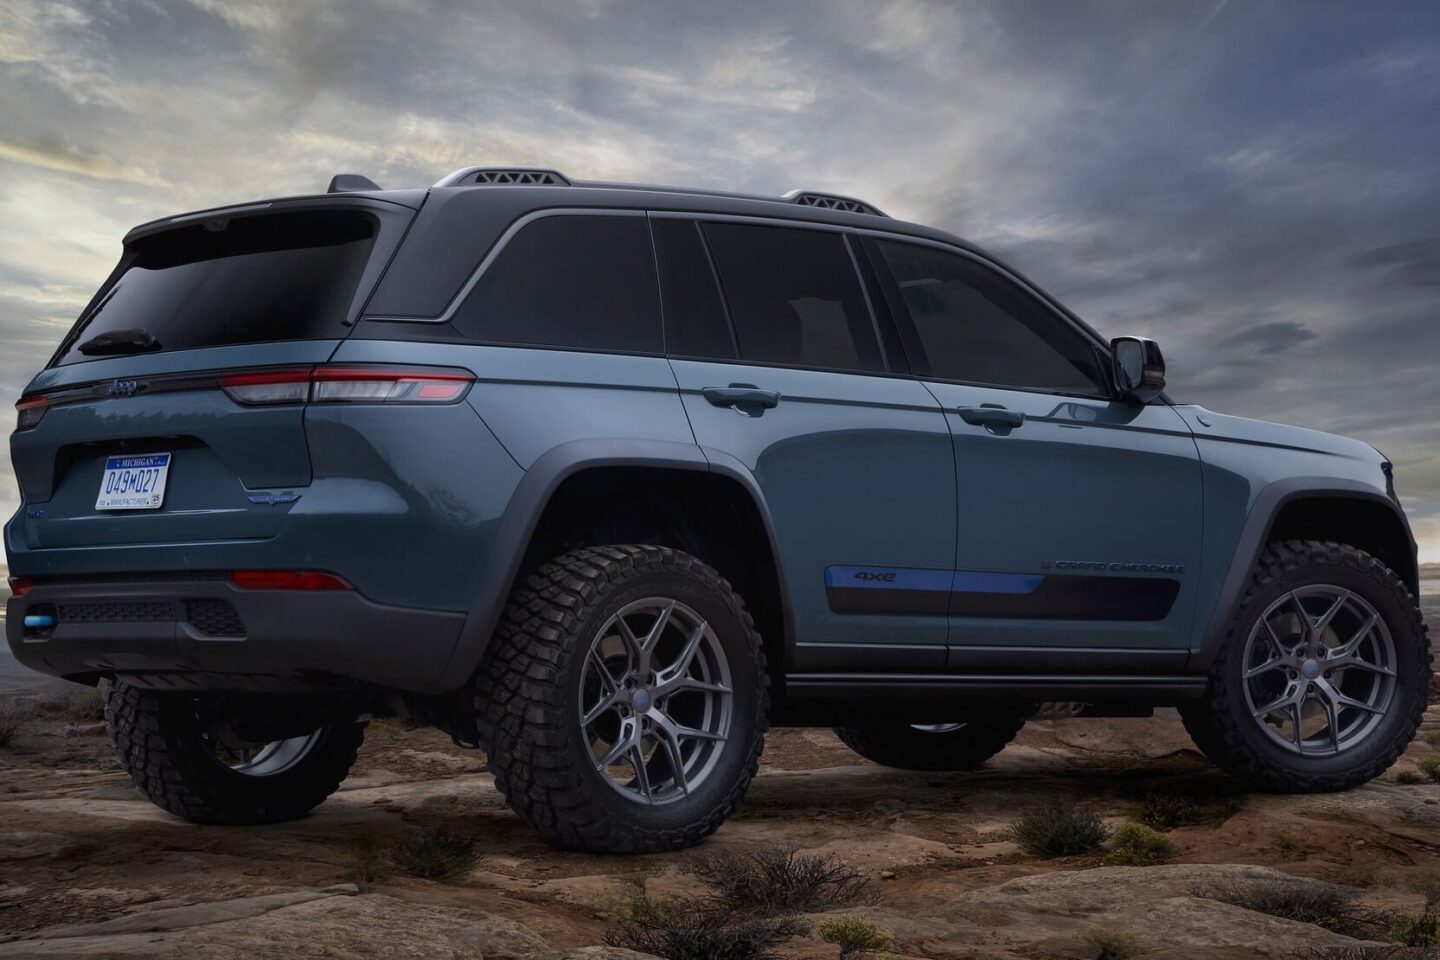 Jeep Grand Cherokee Concept-Front (1)